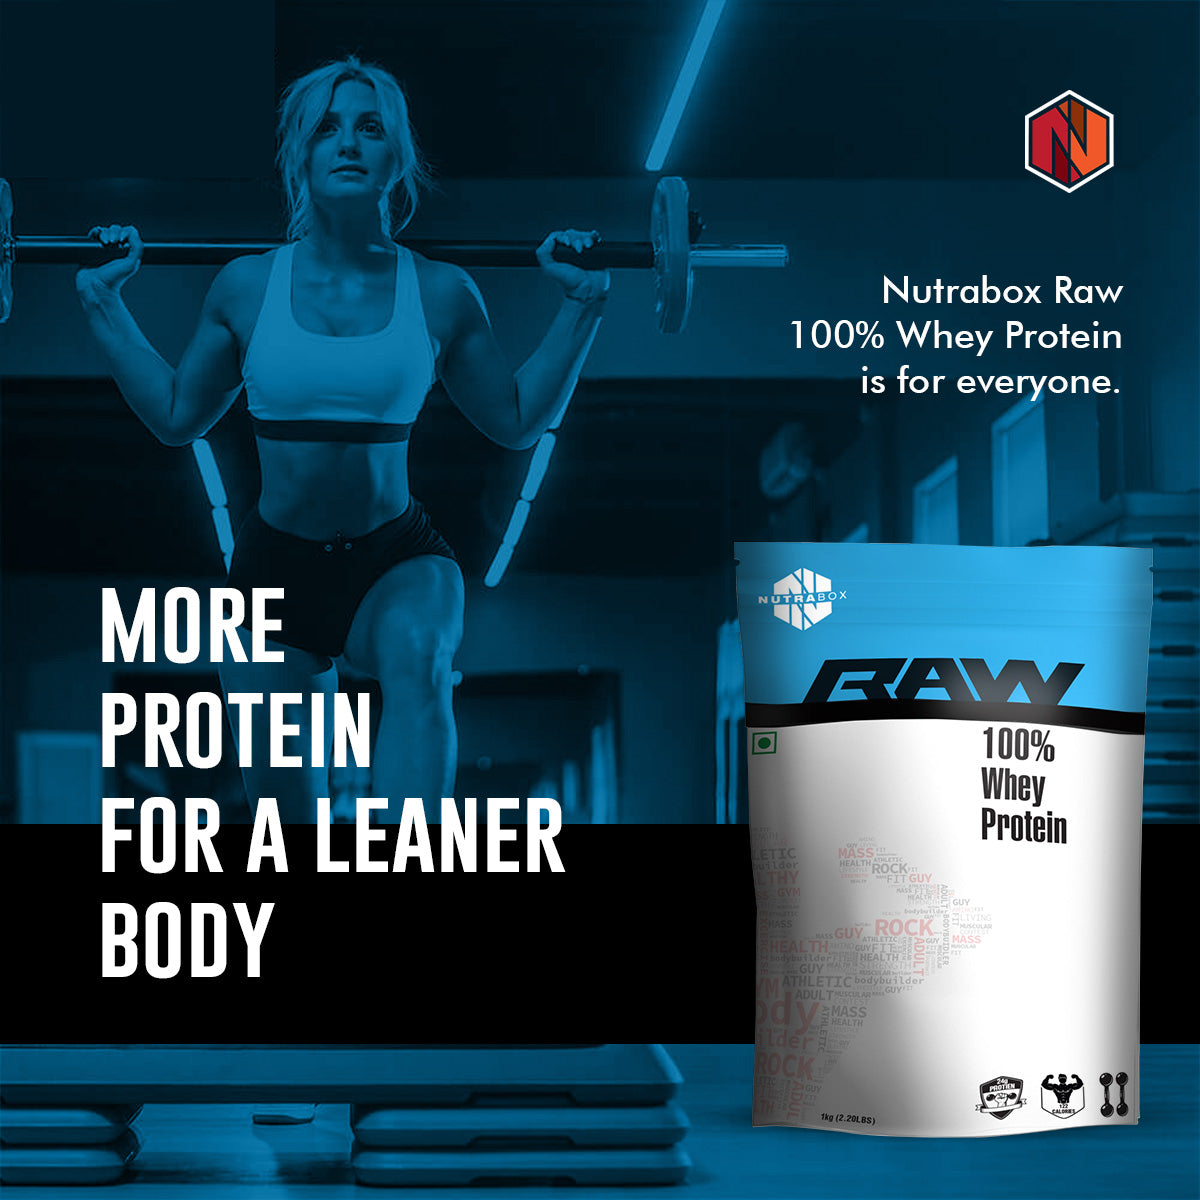 Nutrabox Raw Whey Protein is for everyone.